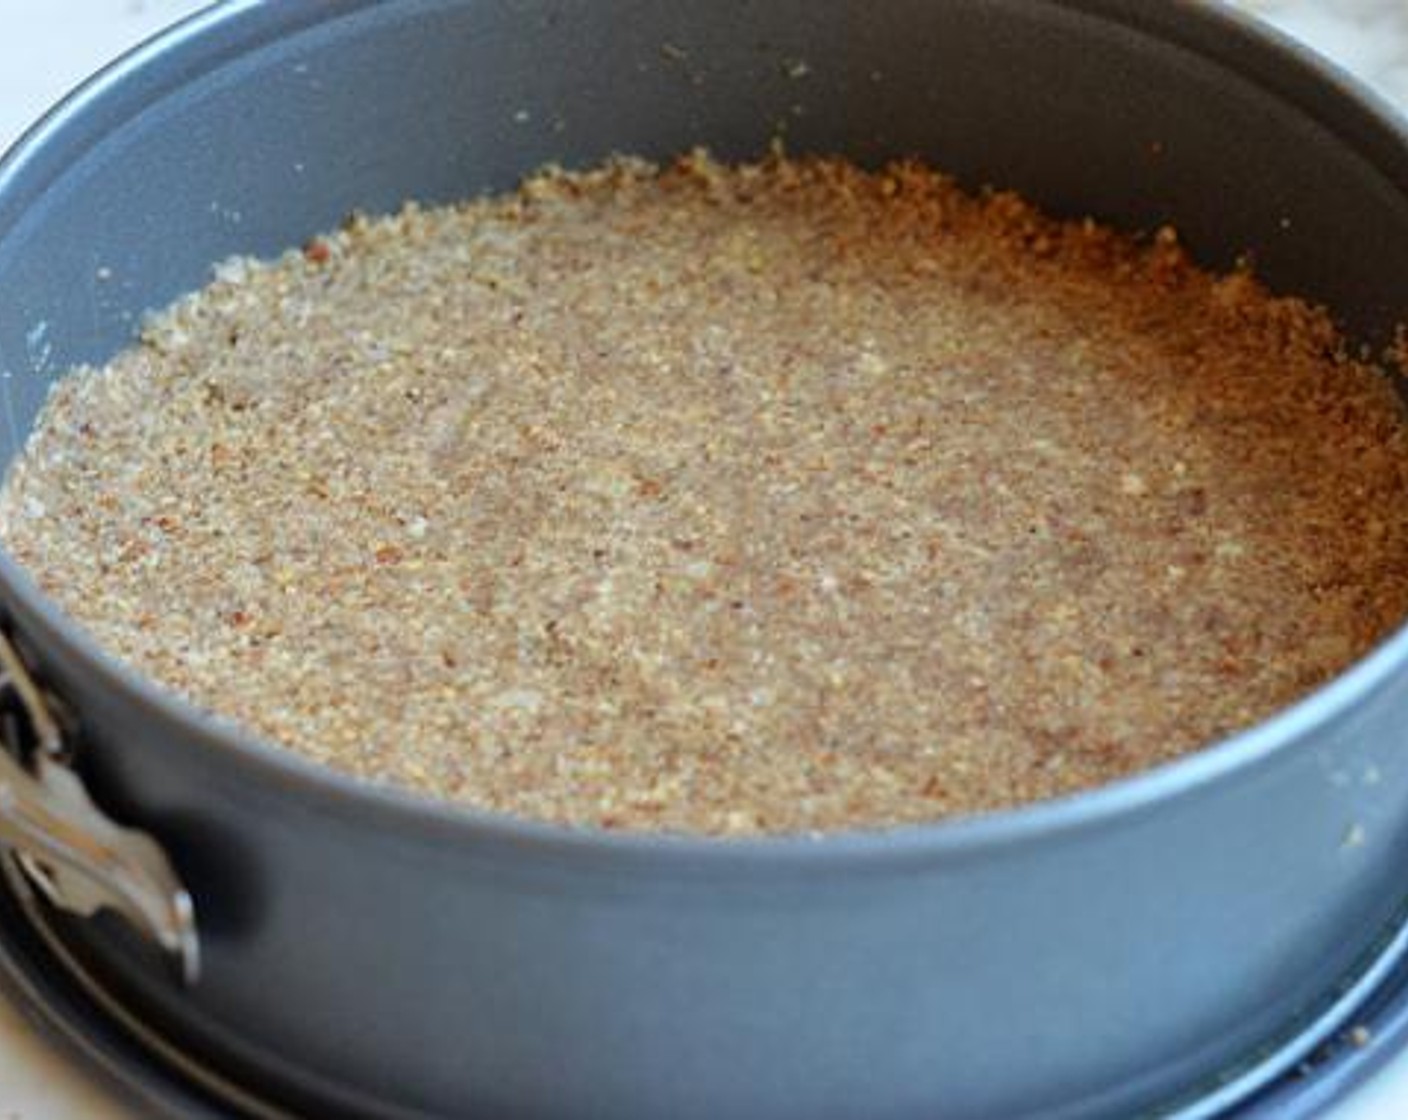 step 4 Transfer the crust mixture to a greased springform pan. Pat into an even layer, then set aside.